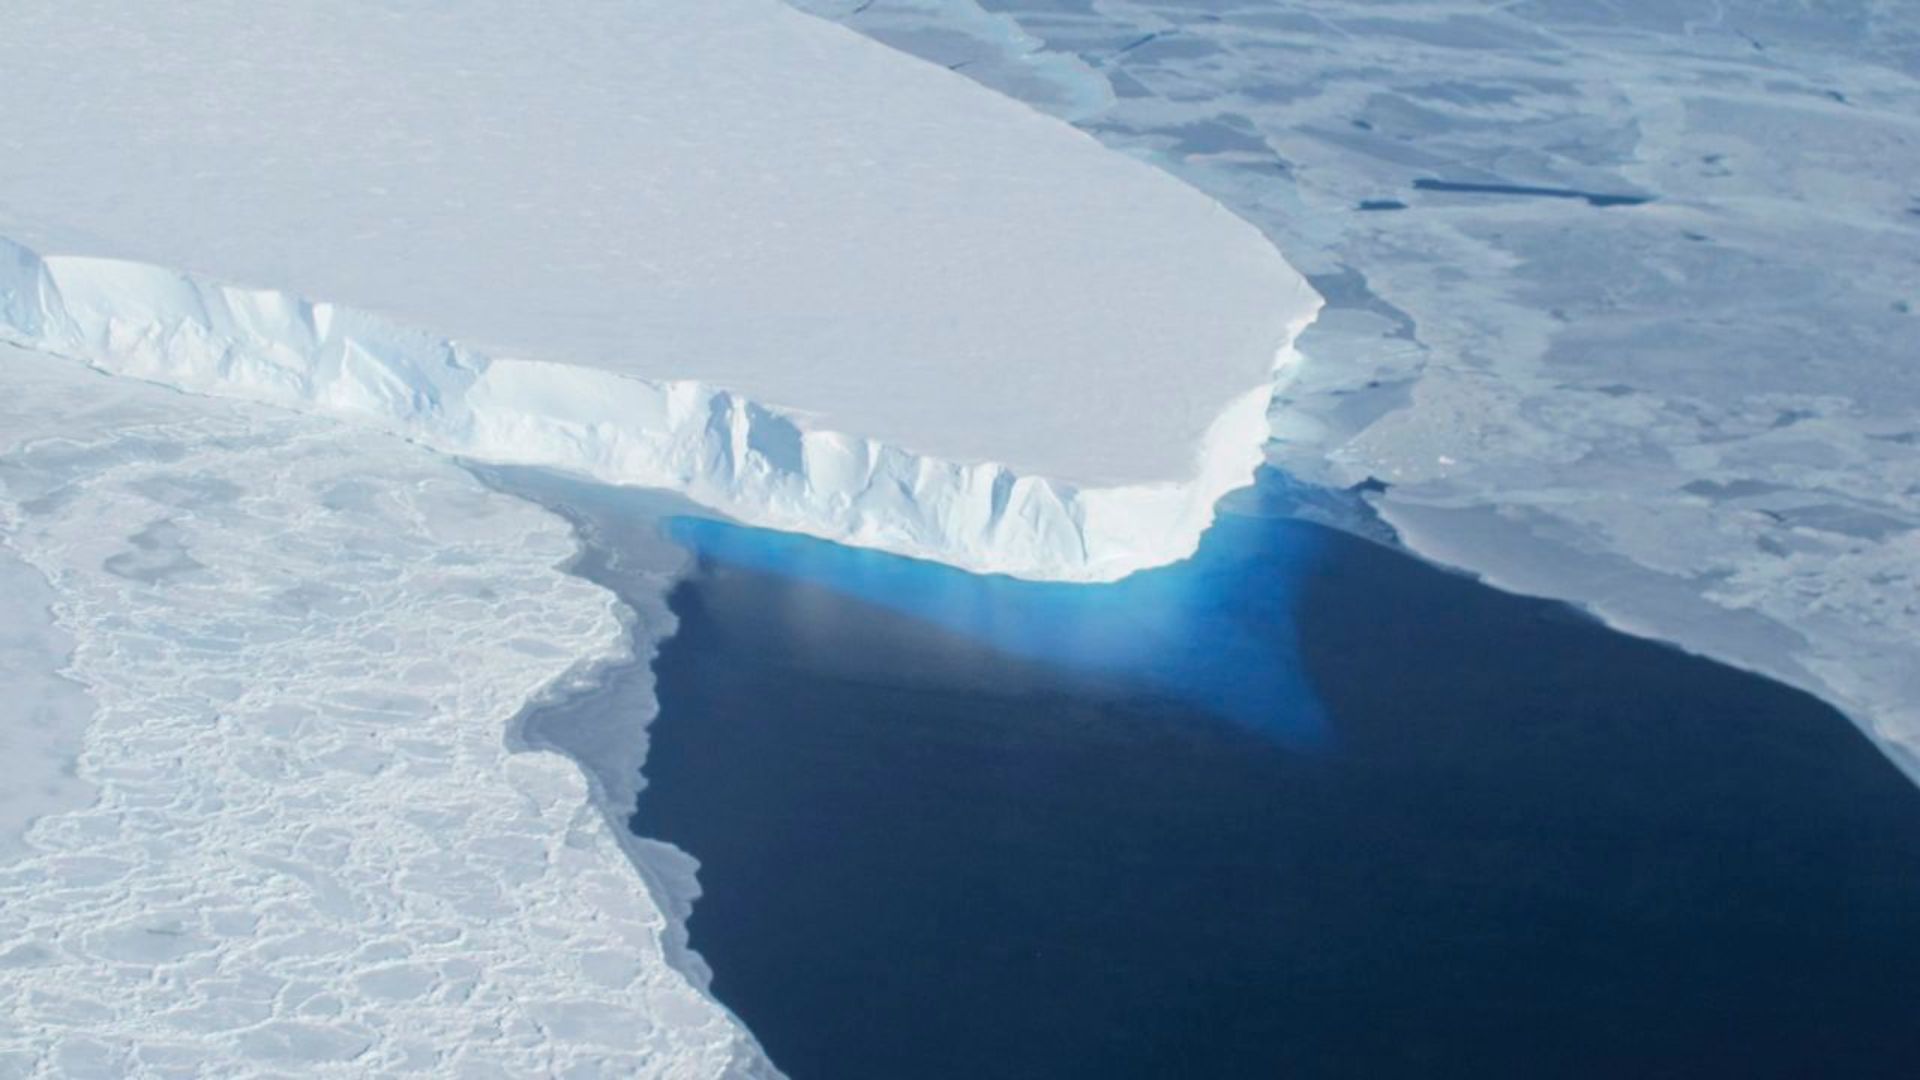 <p>As water-based ice sheets floating throughout the ocean are already mostly submerged, melting will not significantly change the global sea level rise.    </p> <p>Instead, the major concern is the amount of land-based glaciers that have melted in recent years. Most of the ice on the Earth’s surface is above water, creating large landmasses around the North and South poles.  </p>